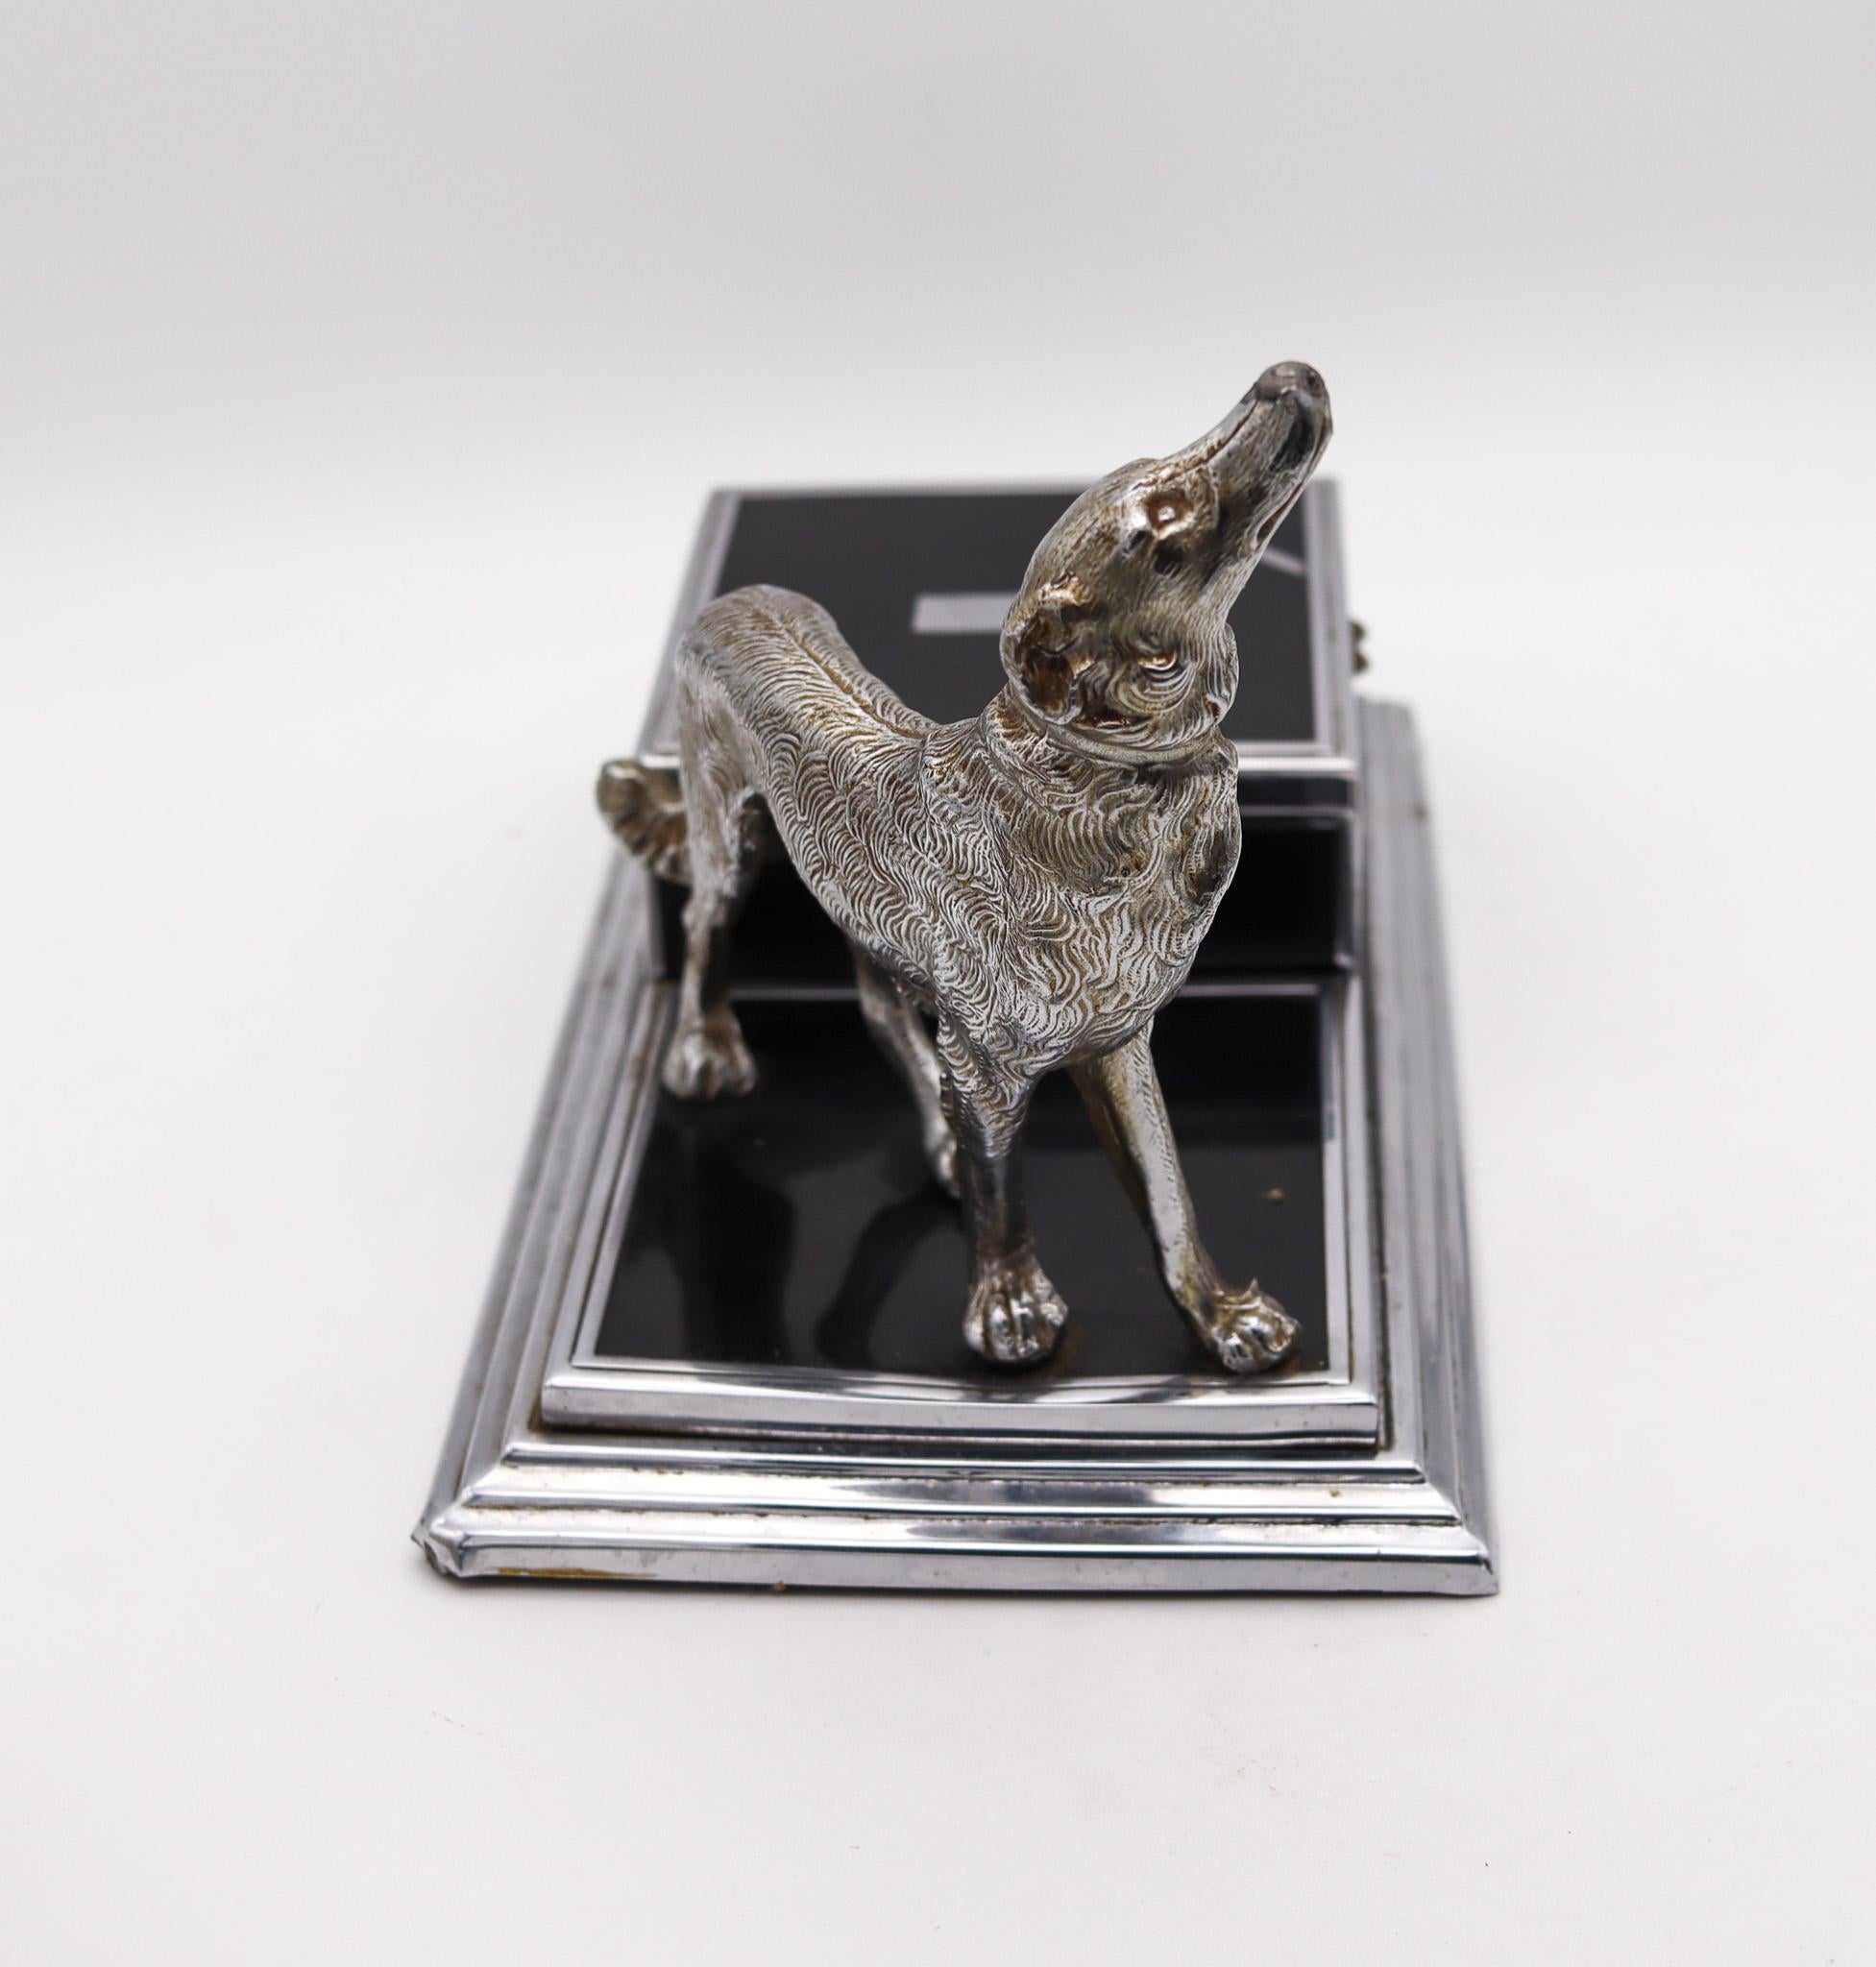 Desk cigarette box with dog designed by Jennings Brothers for Ronson.

Gorgeous desk box created by the Jennings Brothers Manufacturing Company and Ronson. This extremely rare piece has been crafted in solid chromed steel with a silver plated